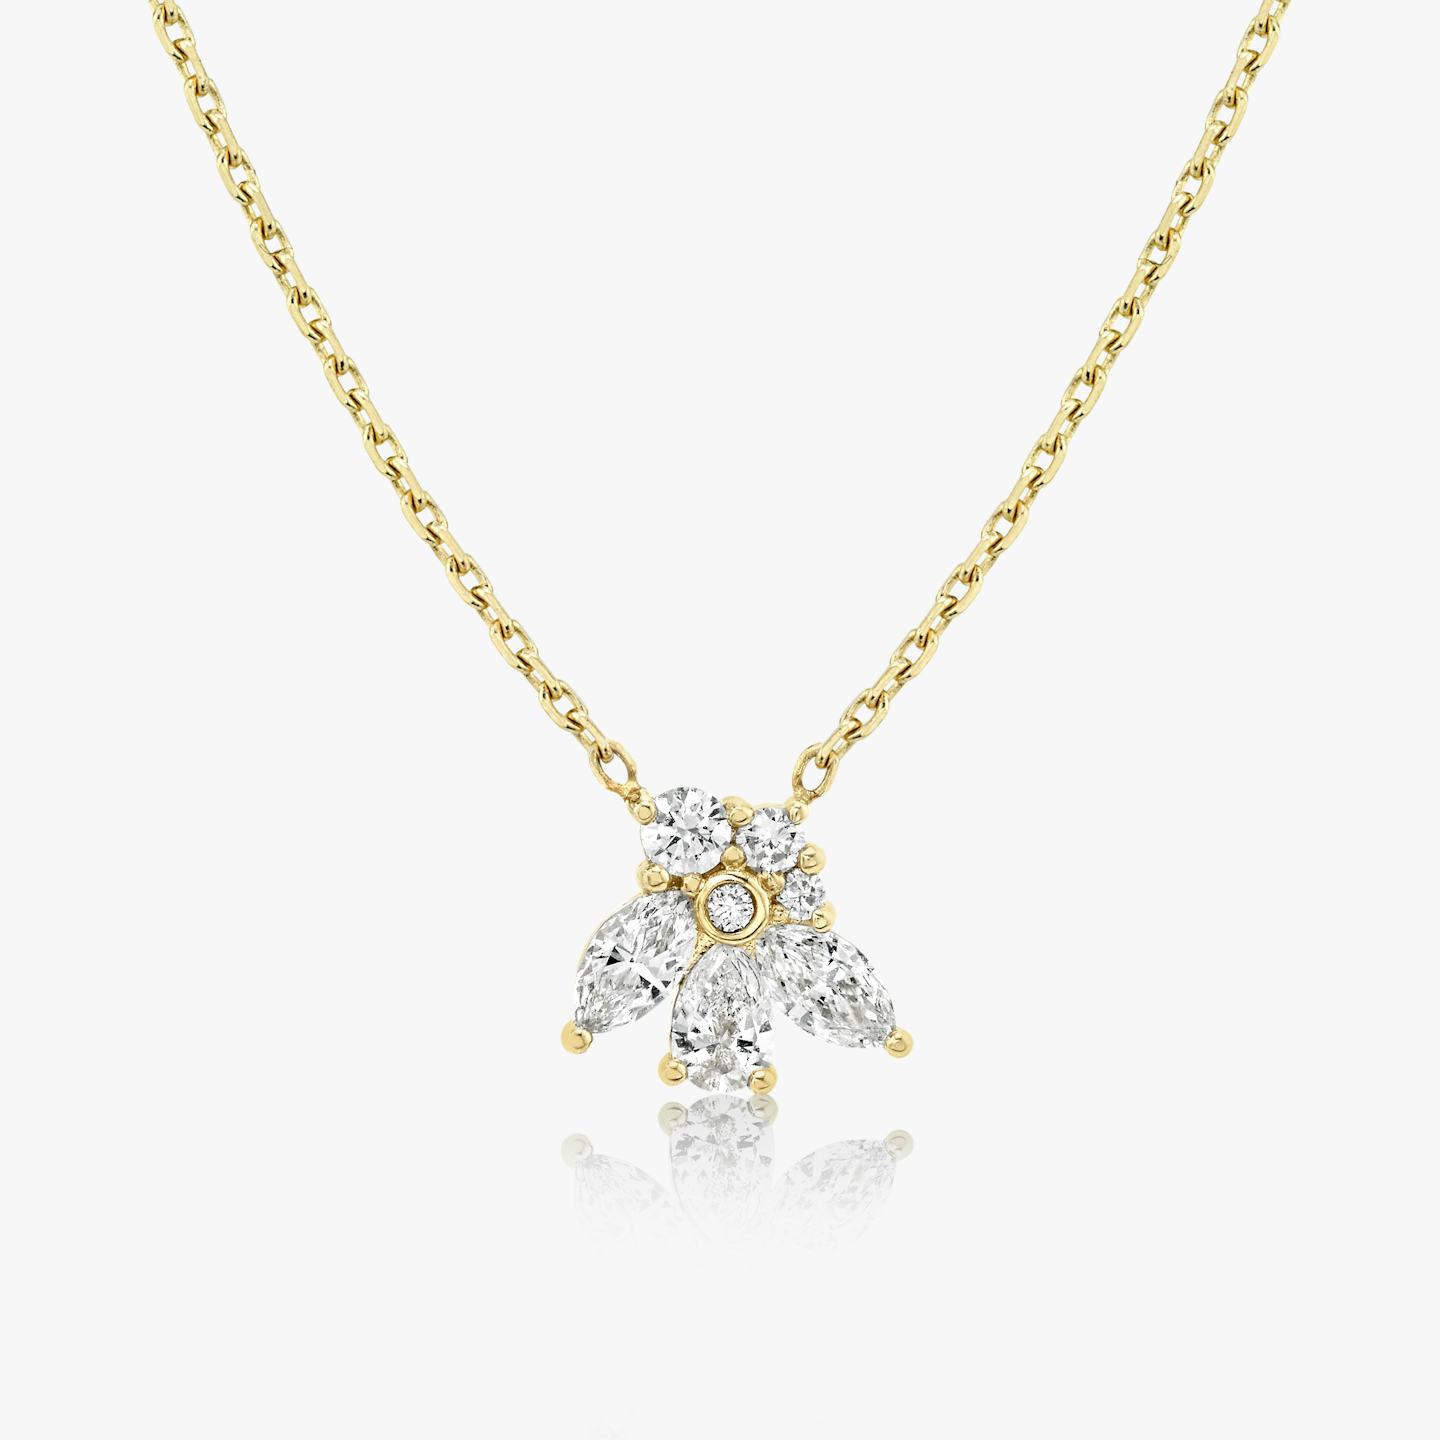 Perennial Necklace | round-brilliant+pear+marquise | 14k | 18k Yellow Gold | Chain length: 16-18